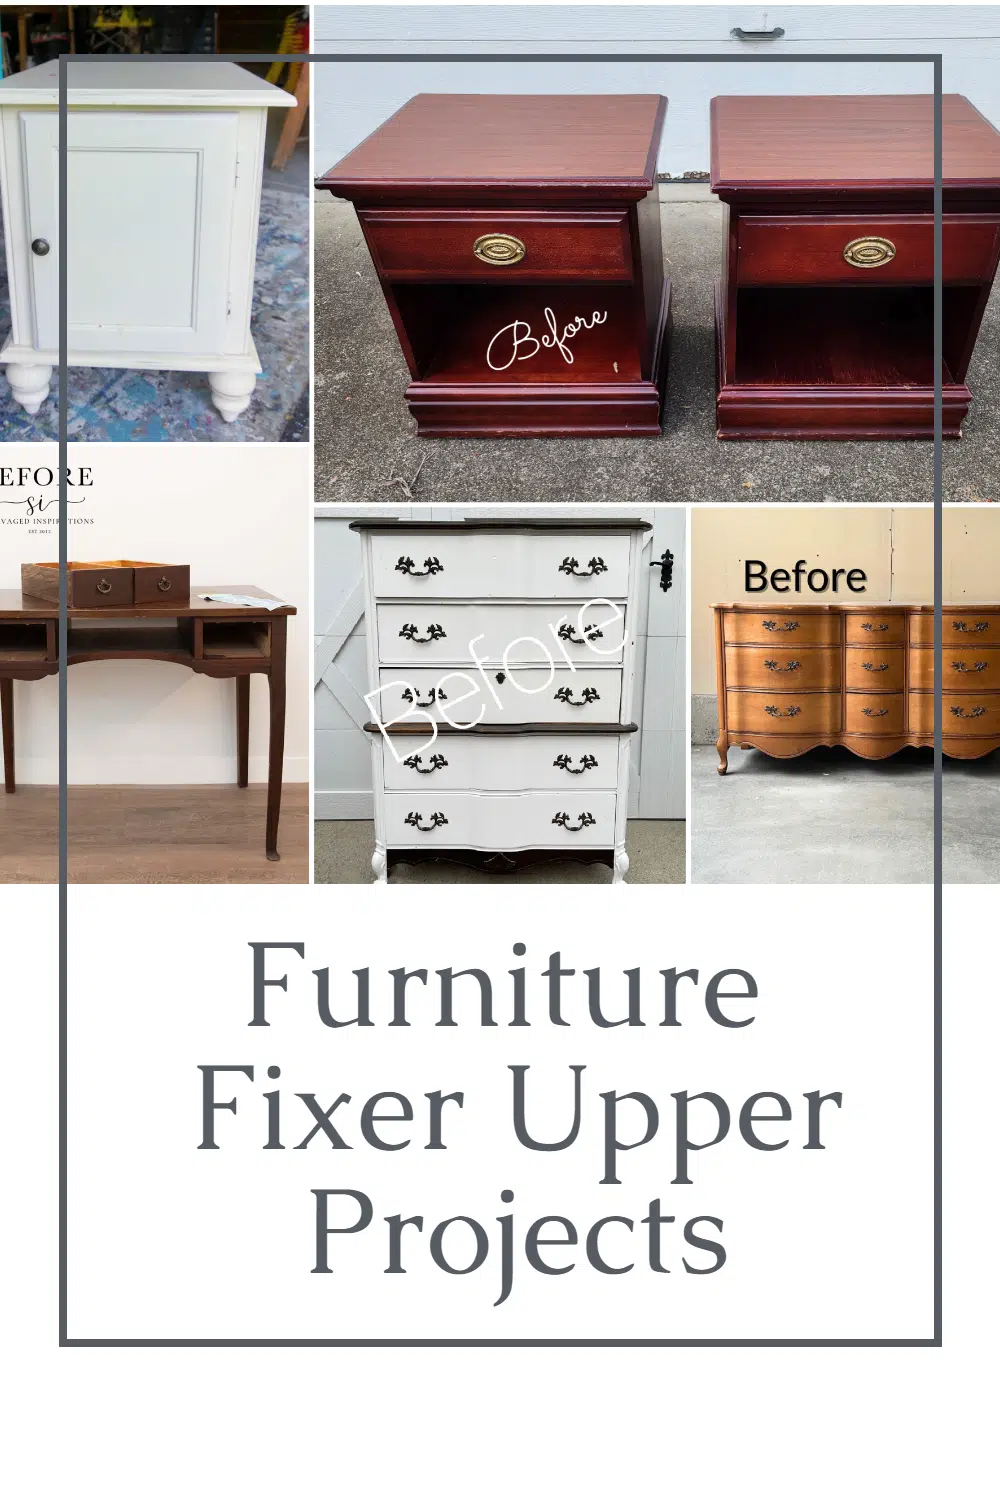 How to flip a pair of free nightstands with an easy furniture makeover. Step-by-step directions for prepping, painting and more. via @repurposedlife